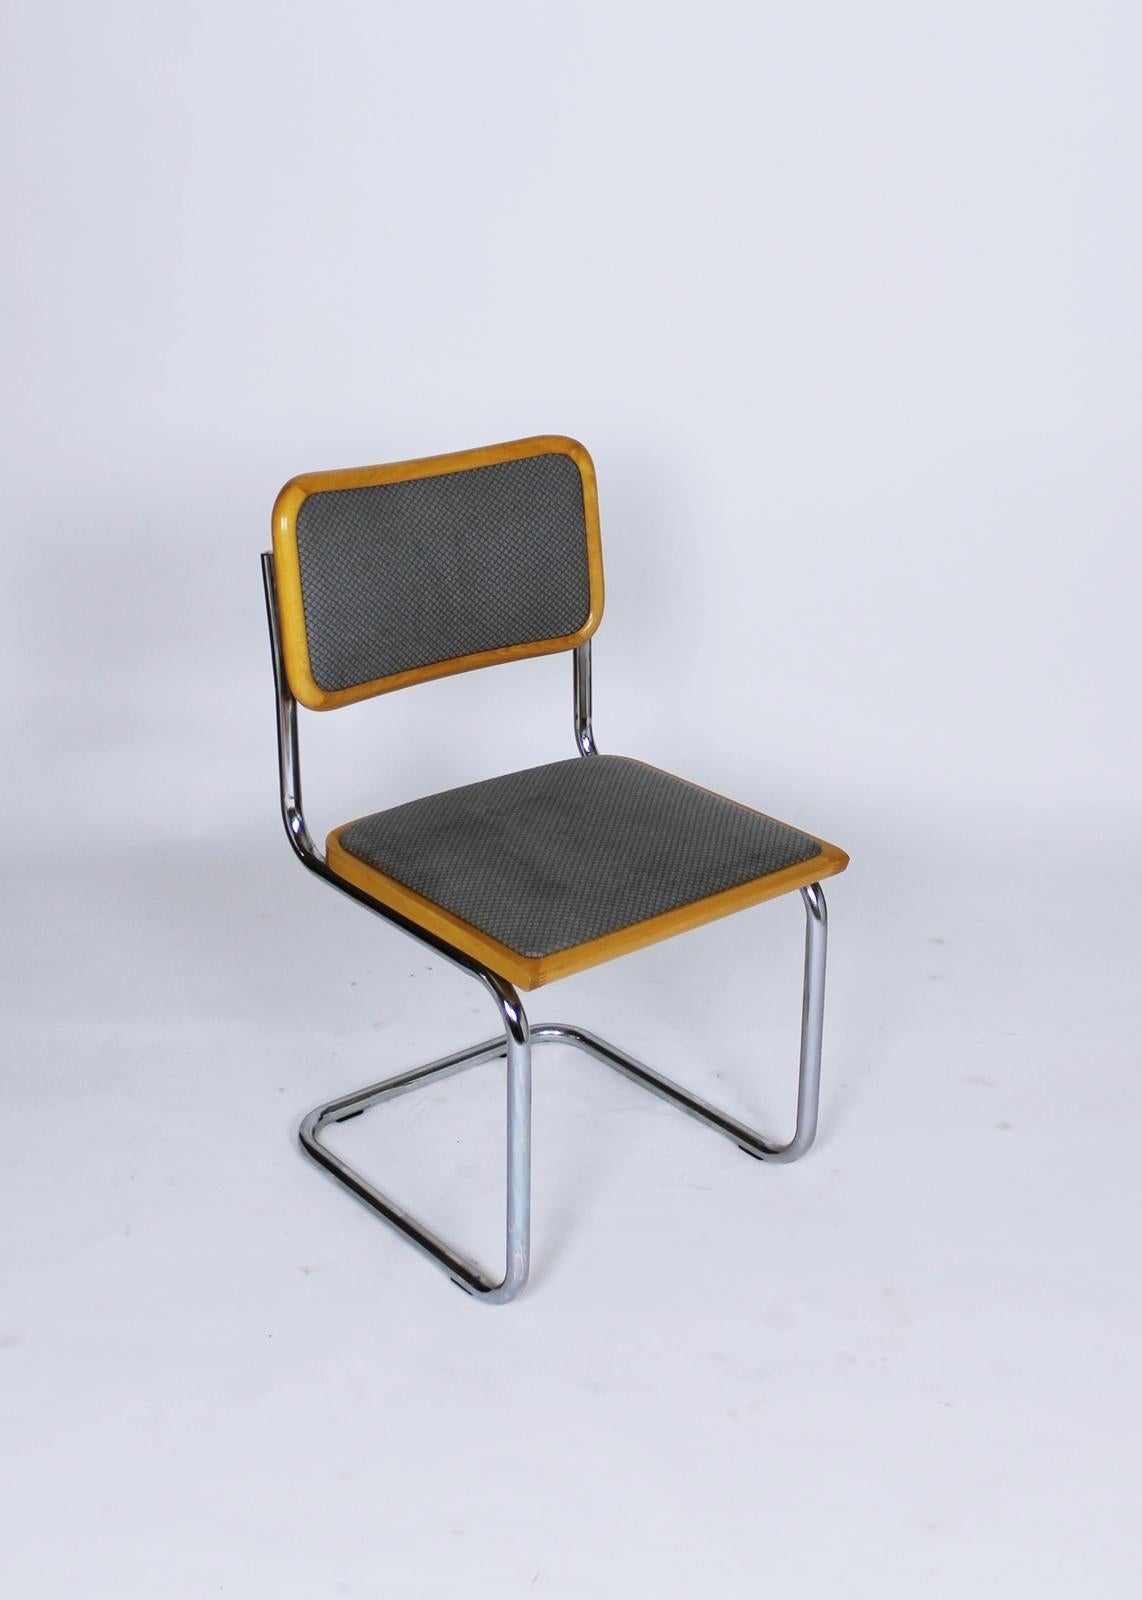 20th Century  Cesca Style Chairs after Marcel Breuer 1990s  Italy For Sale